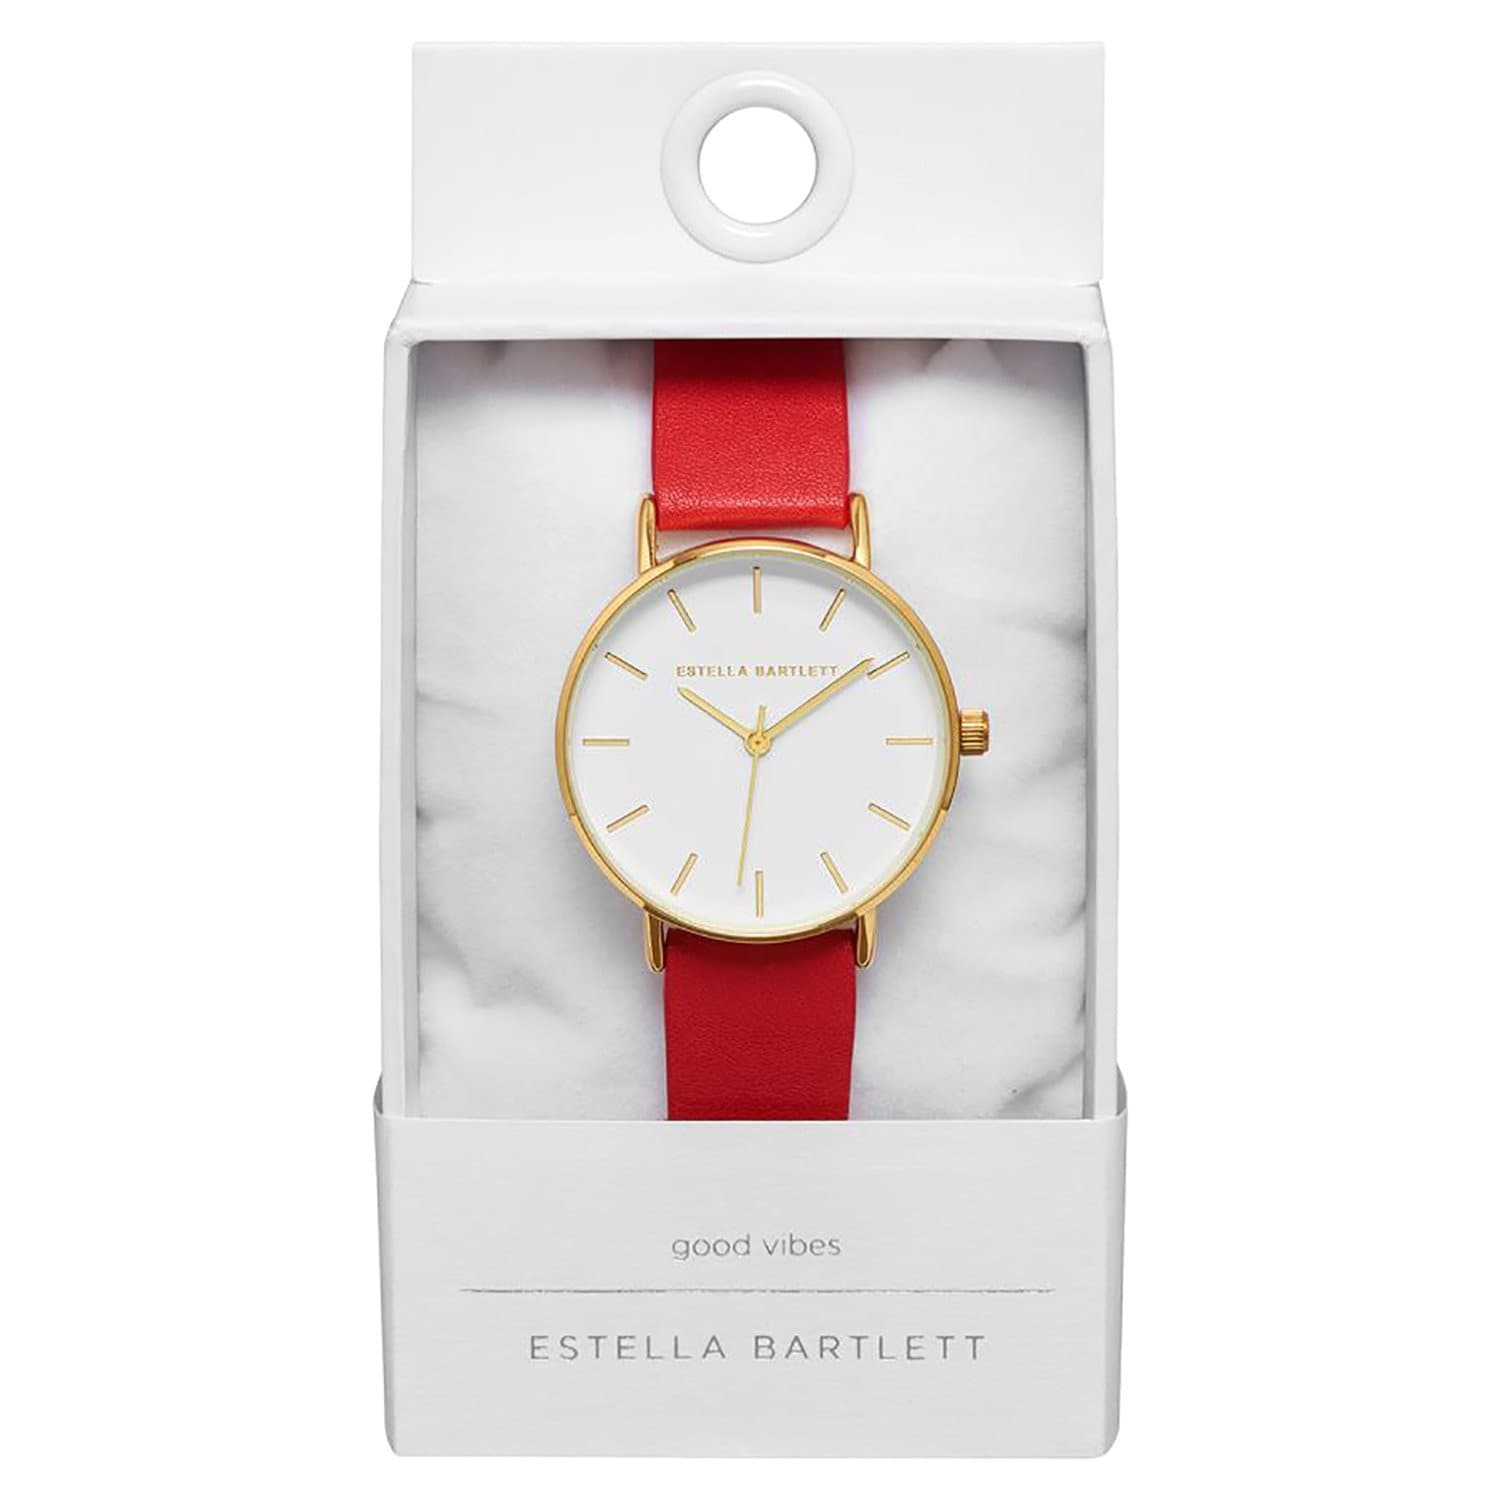 Estella Bartlett Pure Leather Watch - Coral and Gold - EBW3382